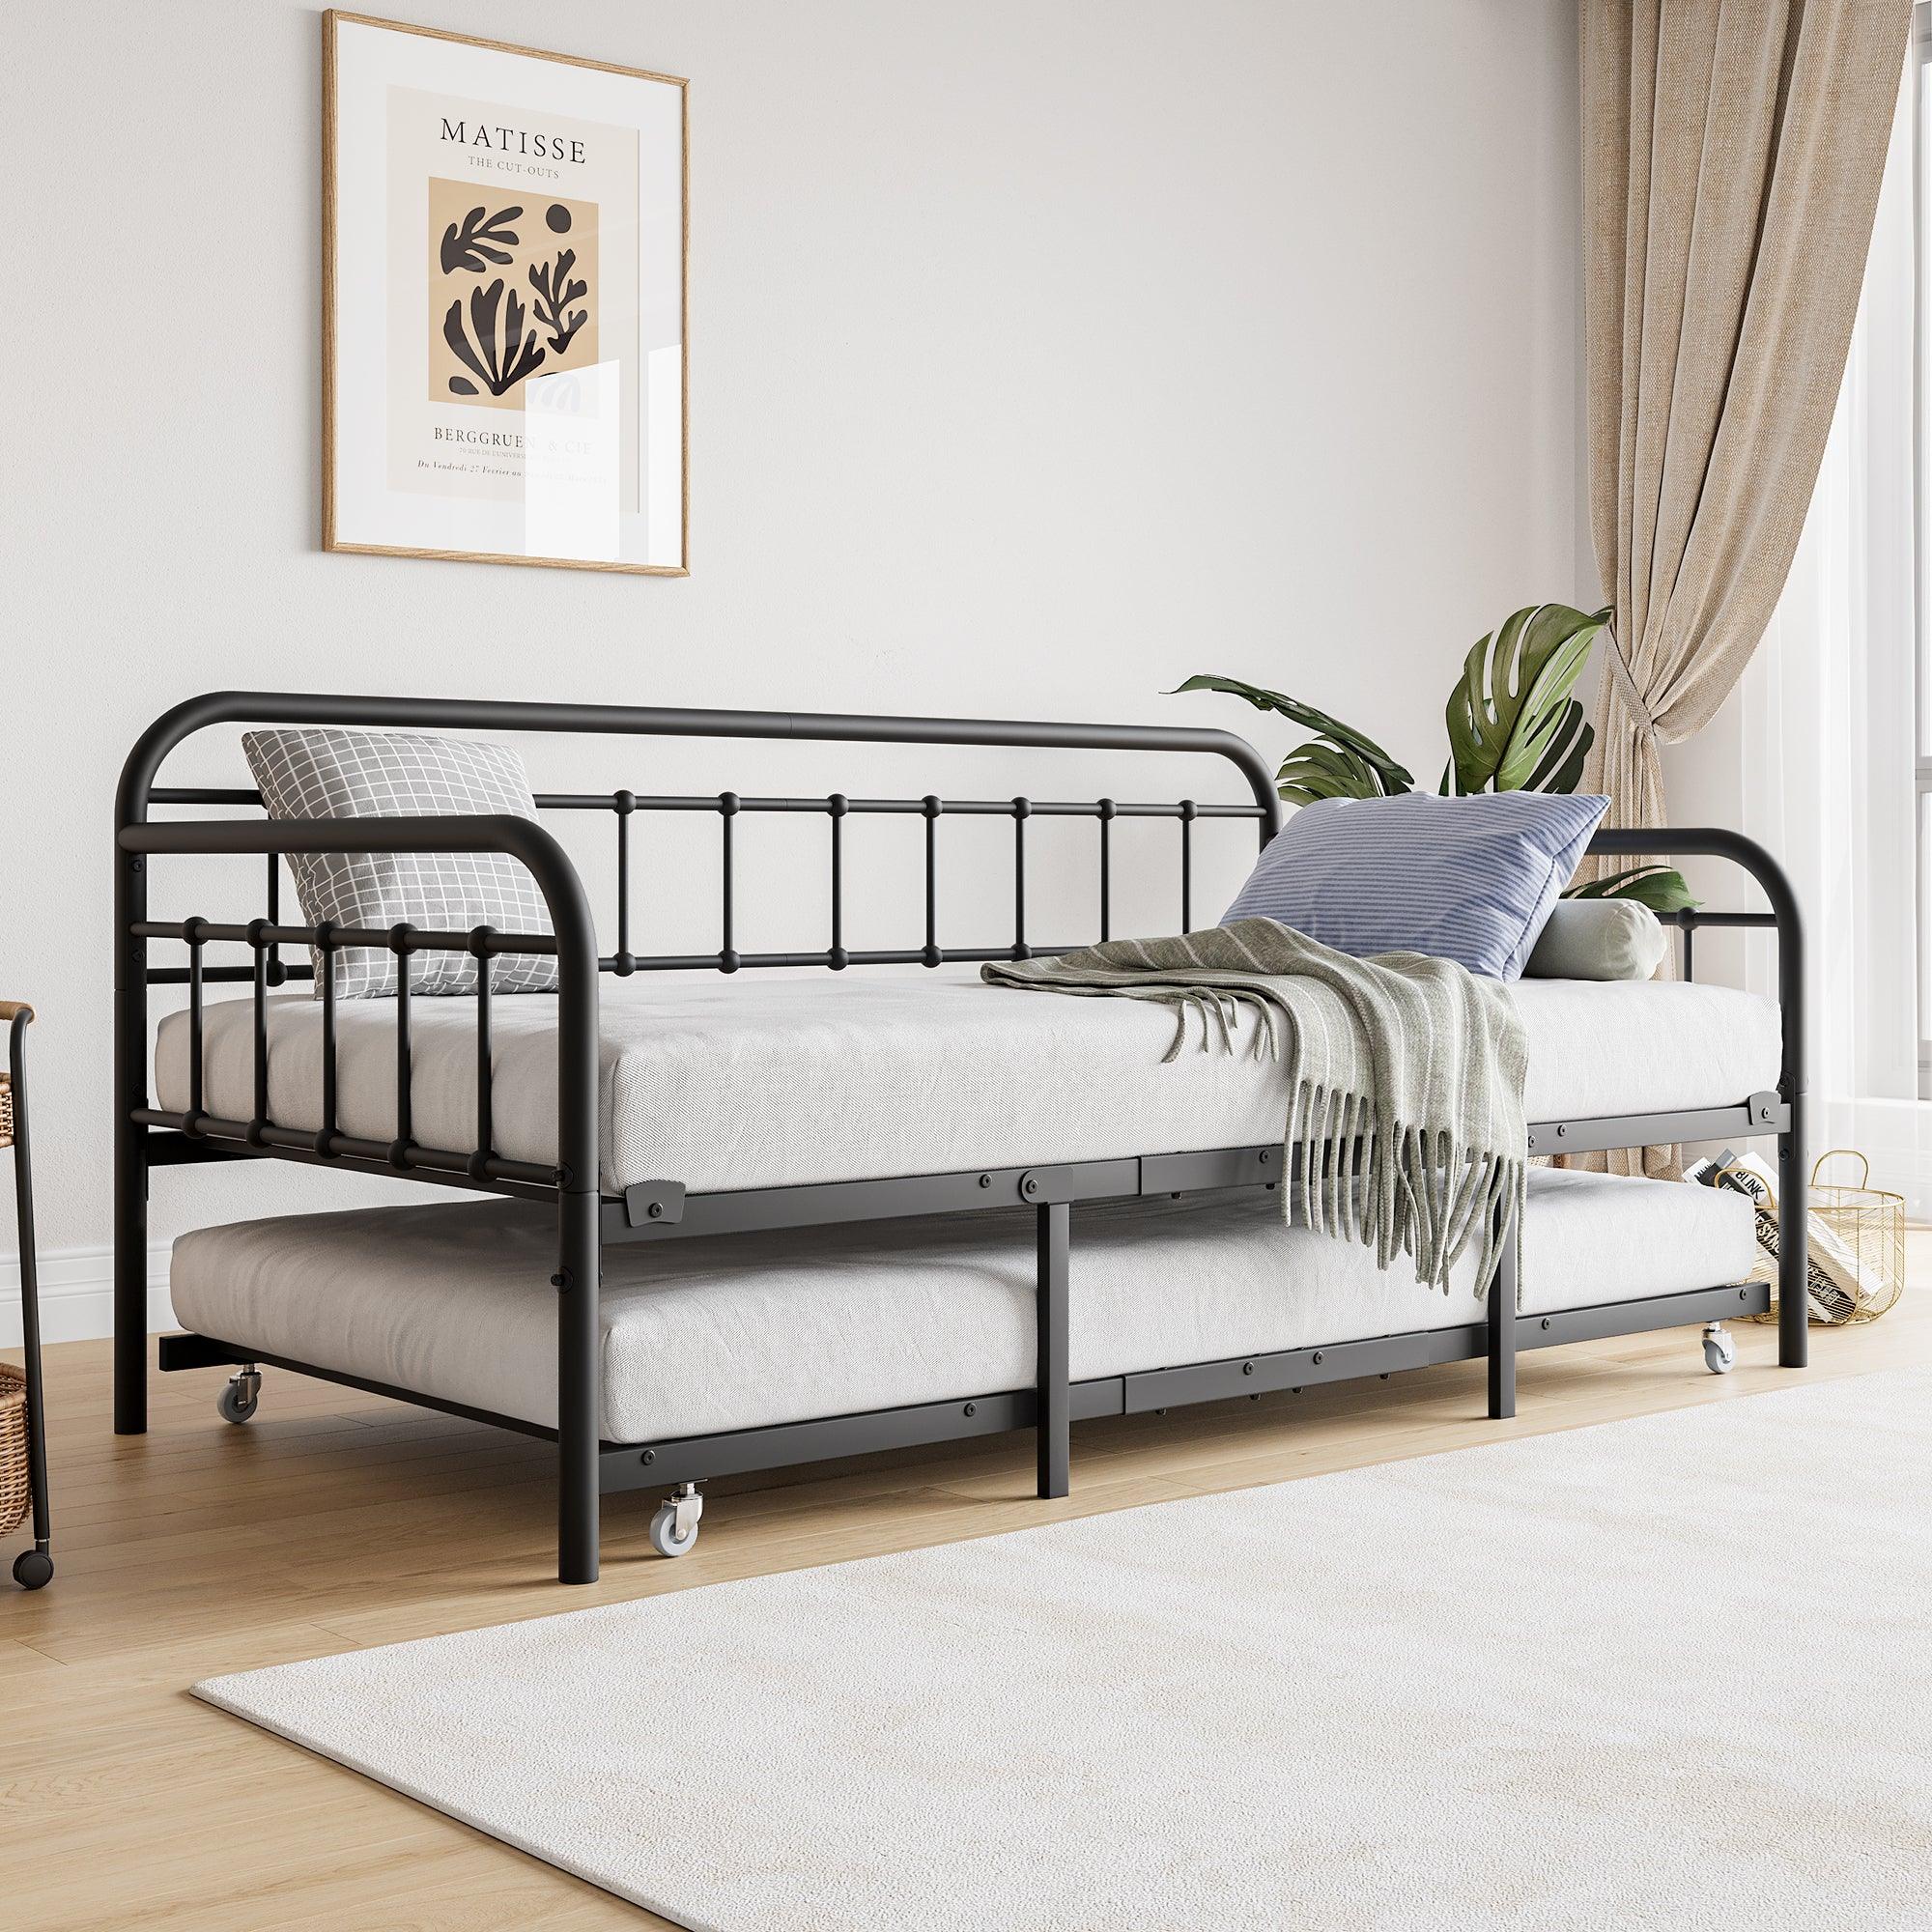 🆓🚛 Twin Size Metal Daybed Frame With Trundle, Heavy Duty Steel Slat Support Sofa Bed Platform With Headboard, No Box Spring Needed, Black